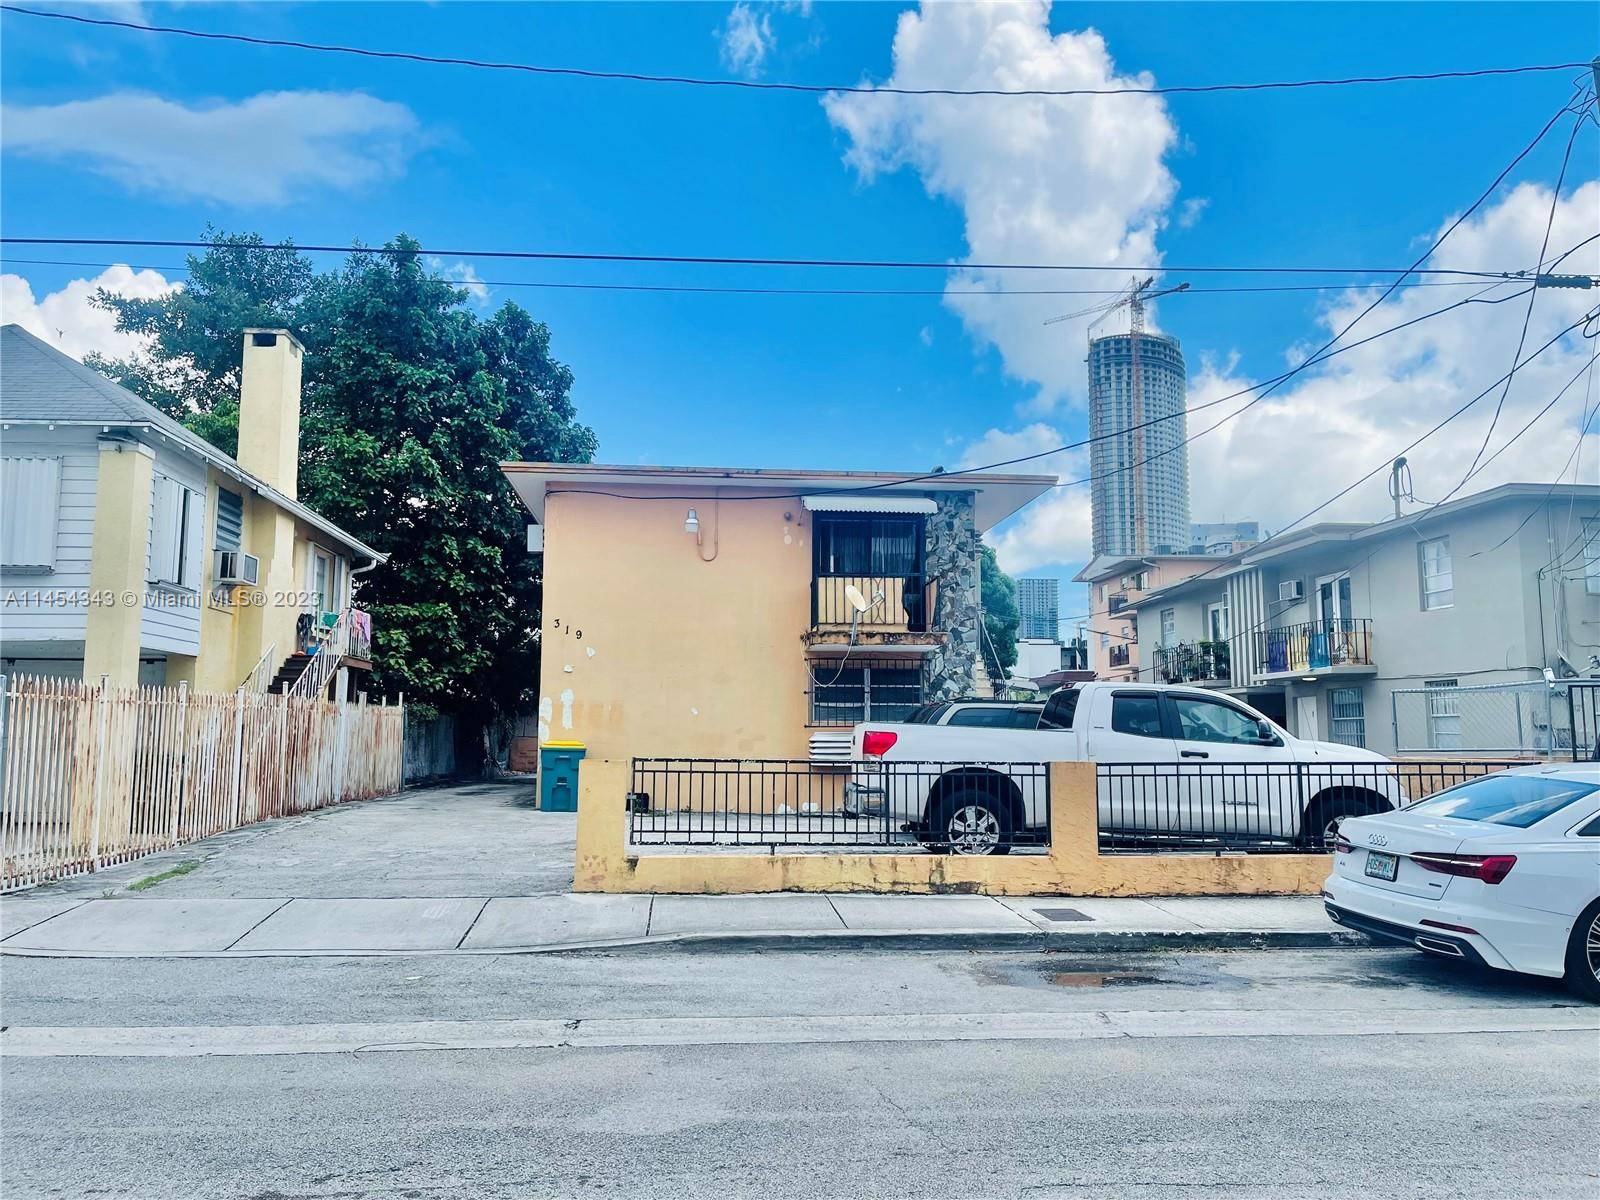 This Little Havana fourplex from the 1969s is an excellent investment opportunity located in a vibrant Miami neighborhood of Little Havana.